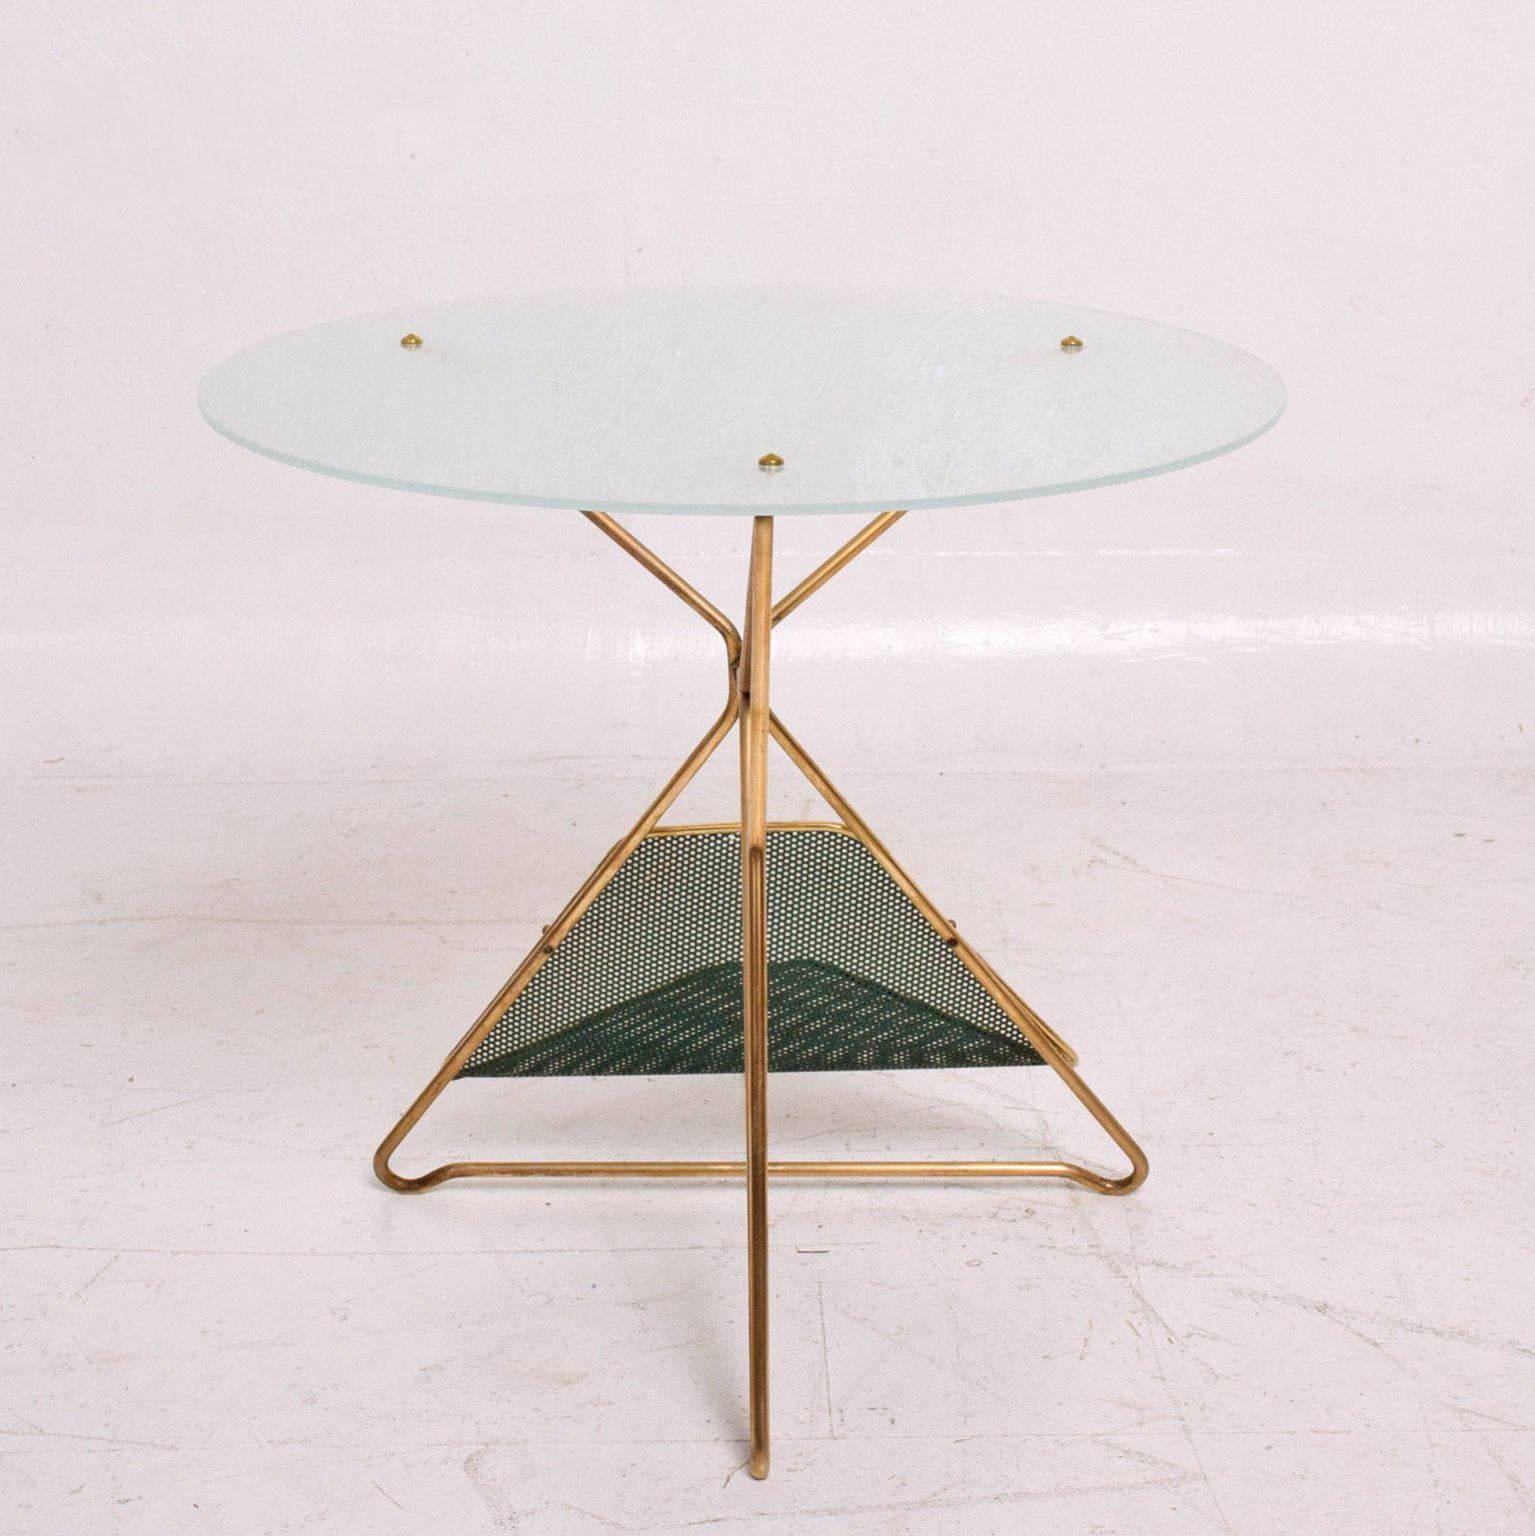 For your consideration a vintage Mid-Century Modern round table constructed with sculptural brass base and frosted round glass top.
The base has a perforated metal (painted in green with brass trim) magazine holder.

Beautiful unique design.